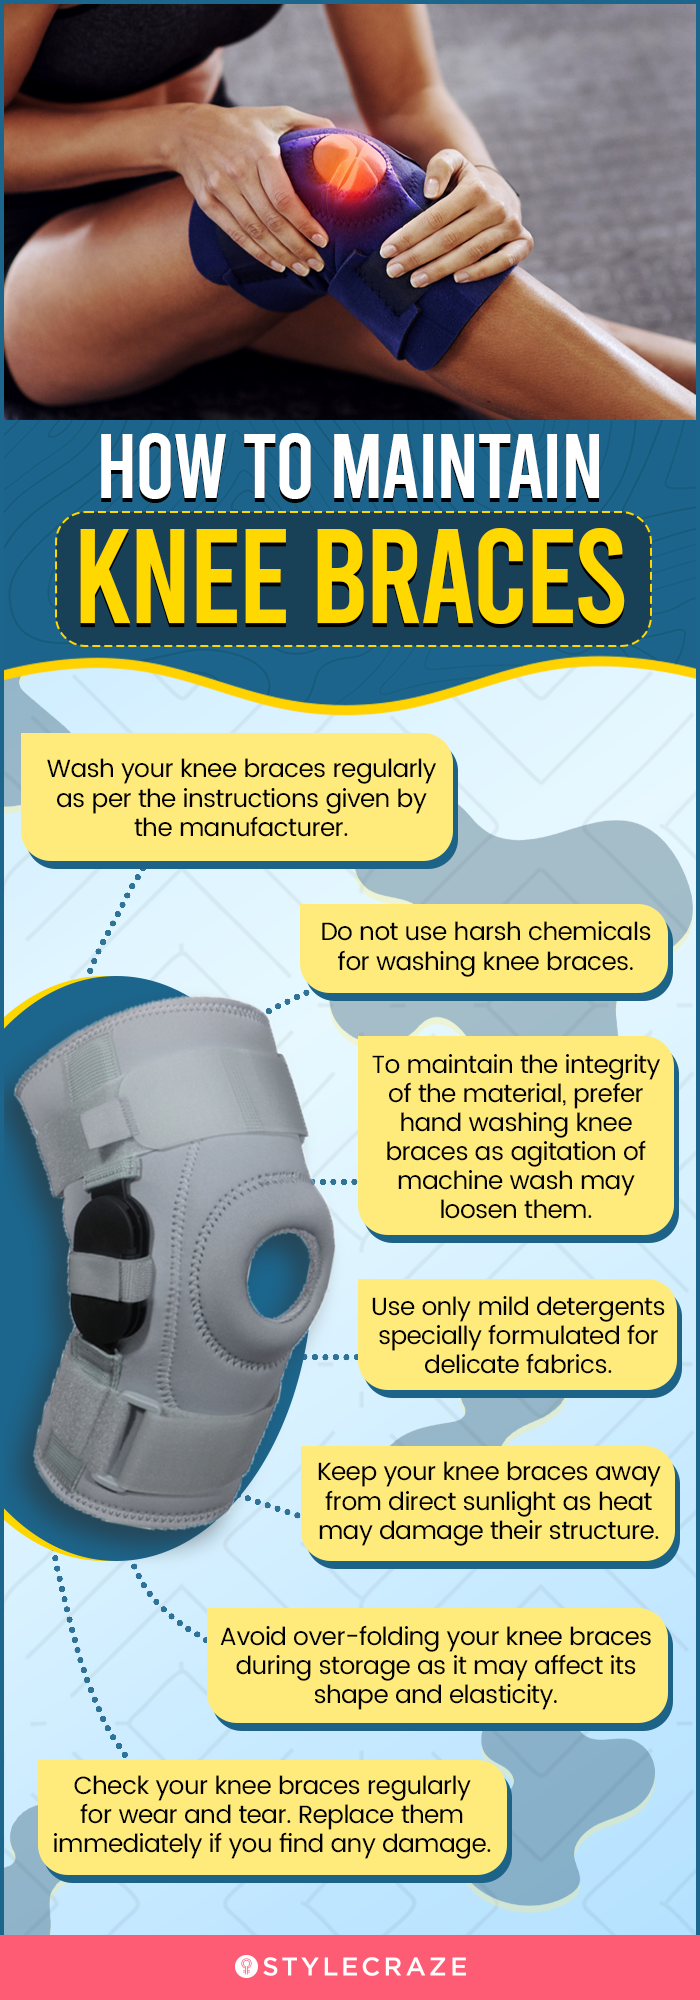 How To Maintain Knee Braces (infographic)